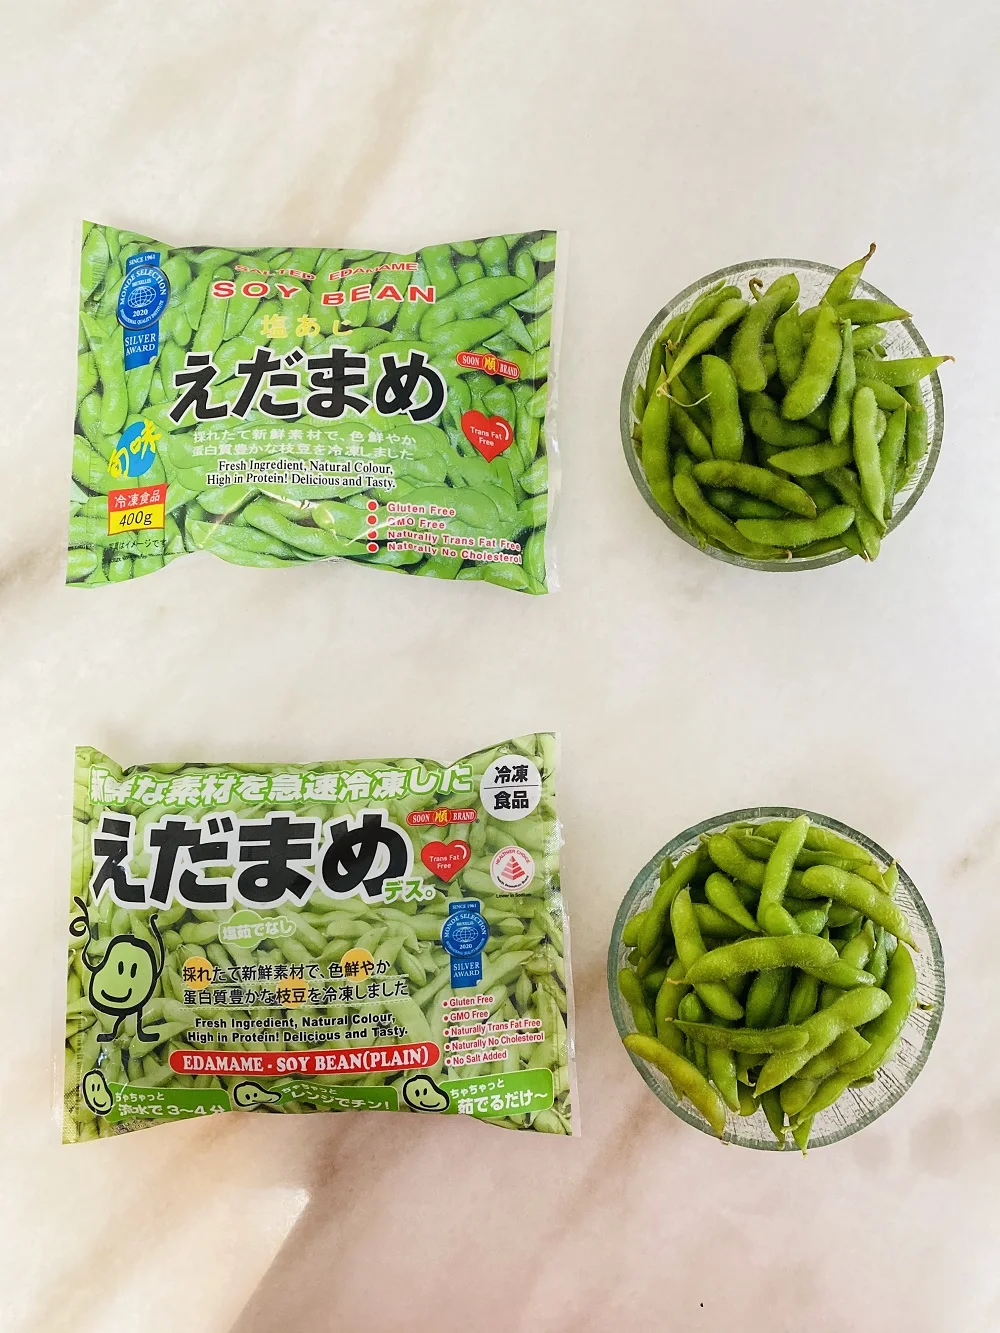 Fresh Ingredients Natural Color Highest Protein Delicious Tasty Frozen Soon Brand Edamame SoyBean (Plain)